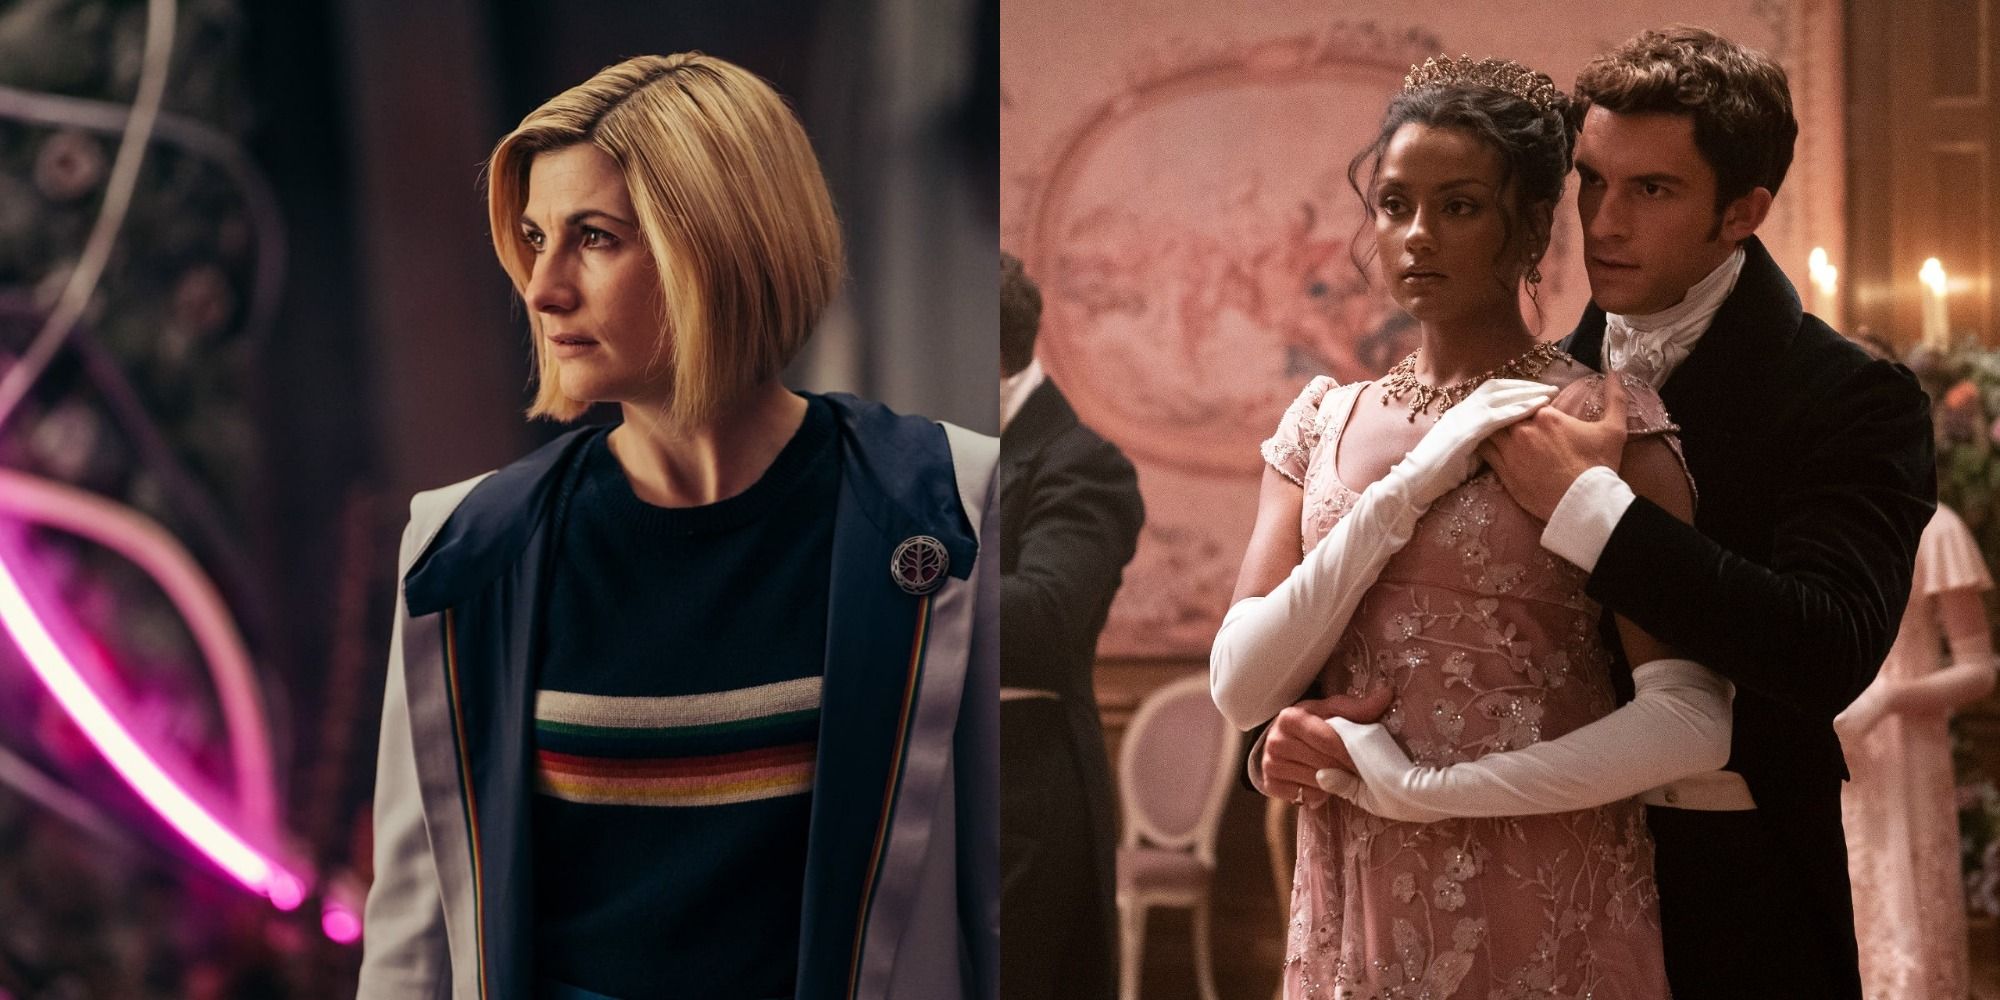 split image - 13th Doctor looking worried in a space station/Kate and Anthony being intimate with each other